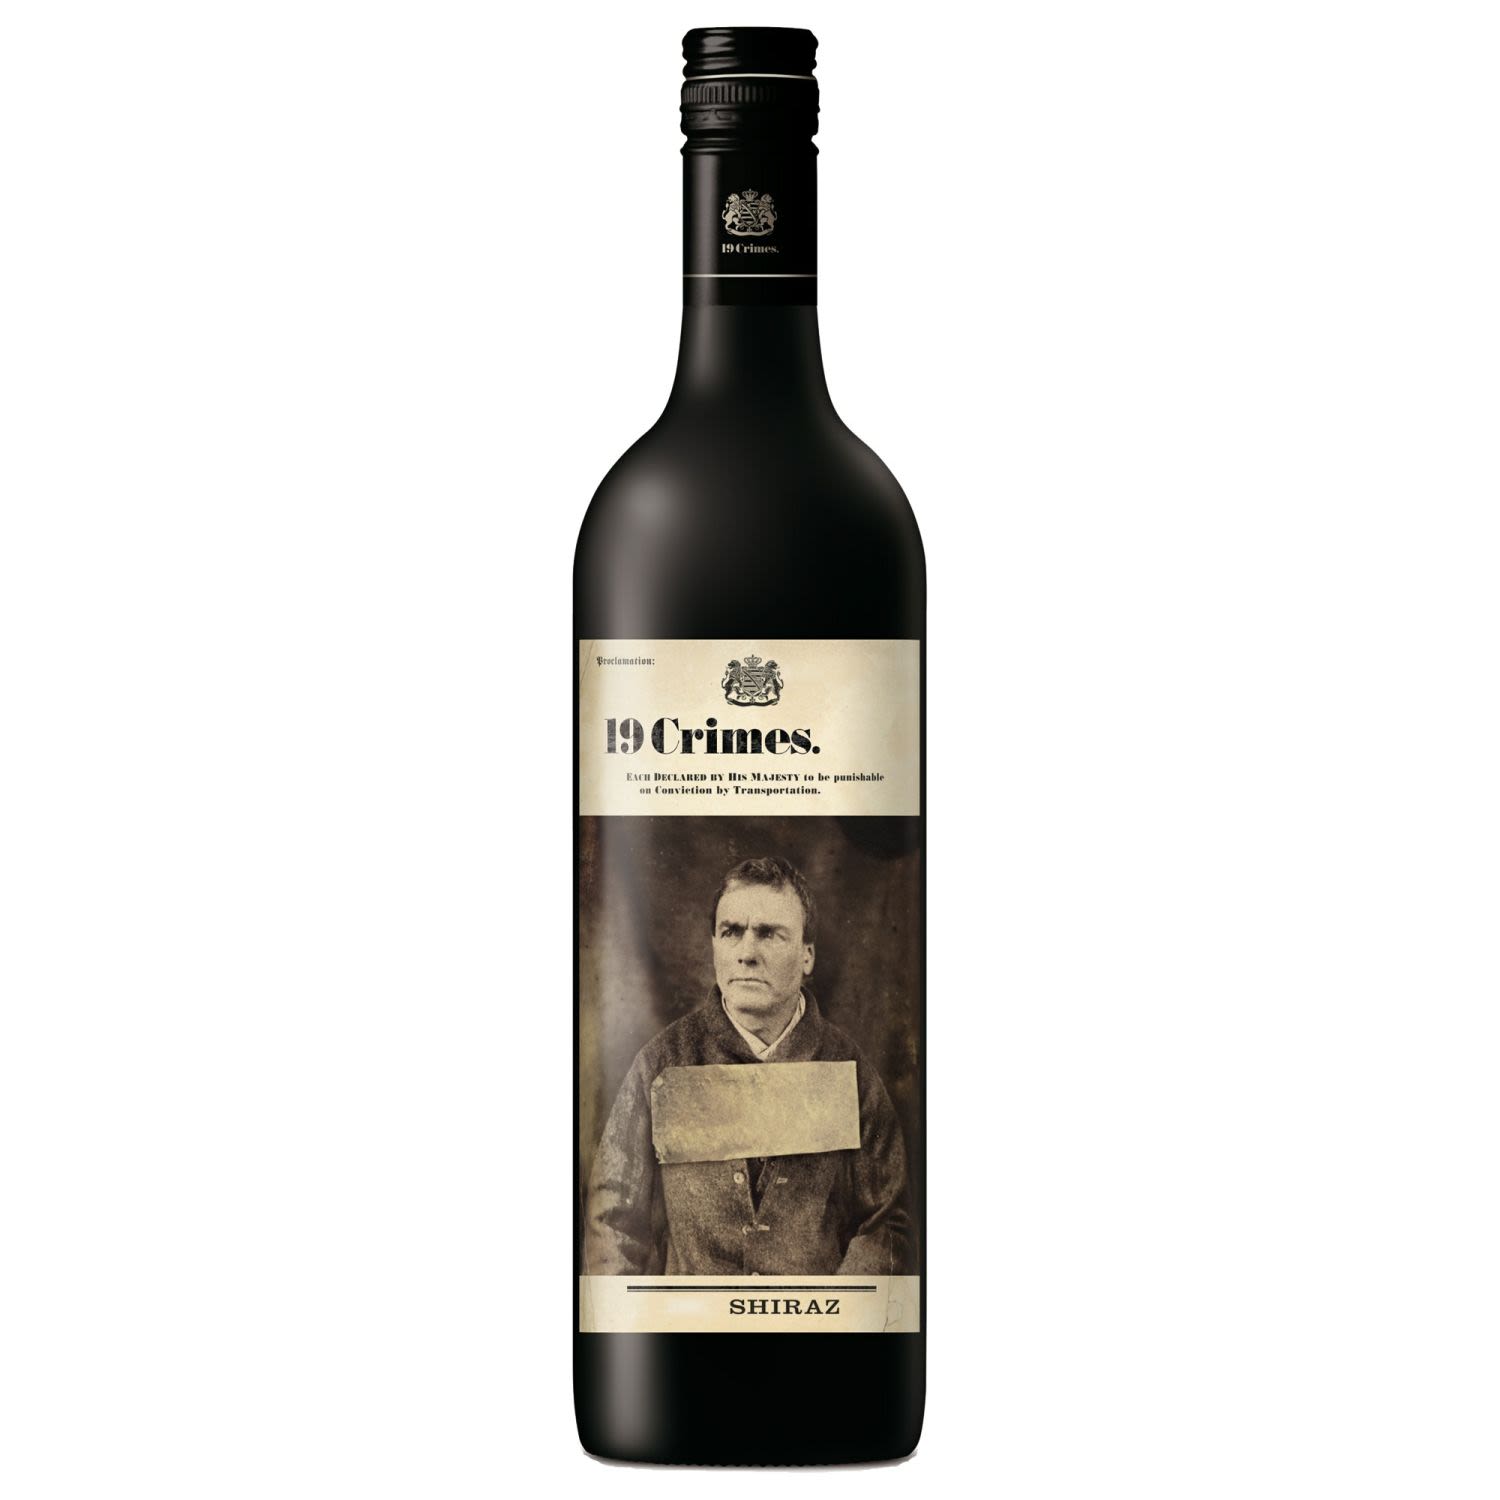 19 Crimes Shiraz. Criminally intense vanilla aromatics are balanced with ripe raspberry and plum fruits. Full and round bright-red wine with crimson hues that give way to subtle sweetness on the palate.<br /> <br />Alcohol Volume: 12.00%<br /><br />Pack Format: Bottle<br /><br />Standard Drinks: 8</br /><br />Pack Type: Bottle<br /><br />Country of Origin: Australia<br /><br />Region: South Eastern Australia<br /><br />Vintage: Vintages Vary<br />